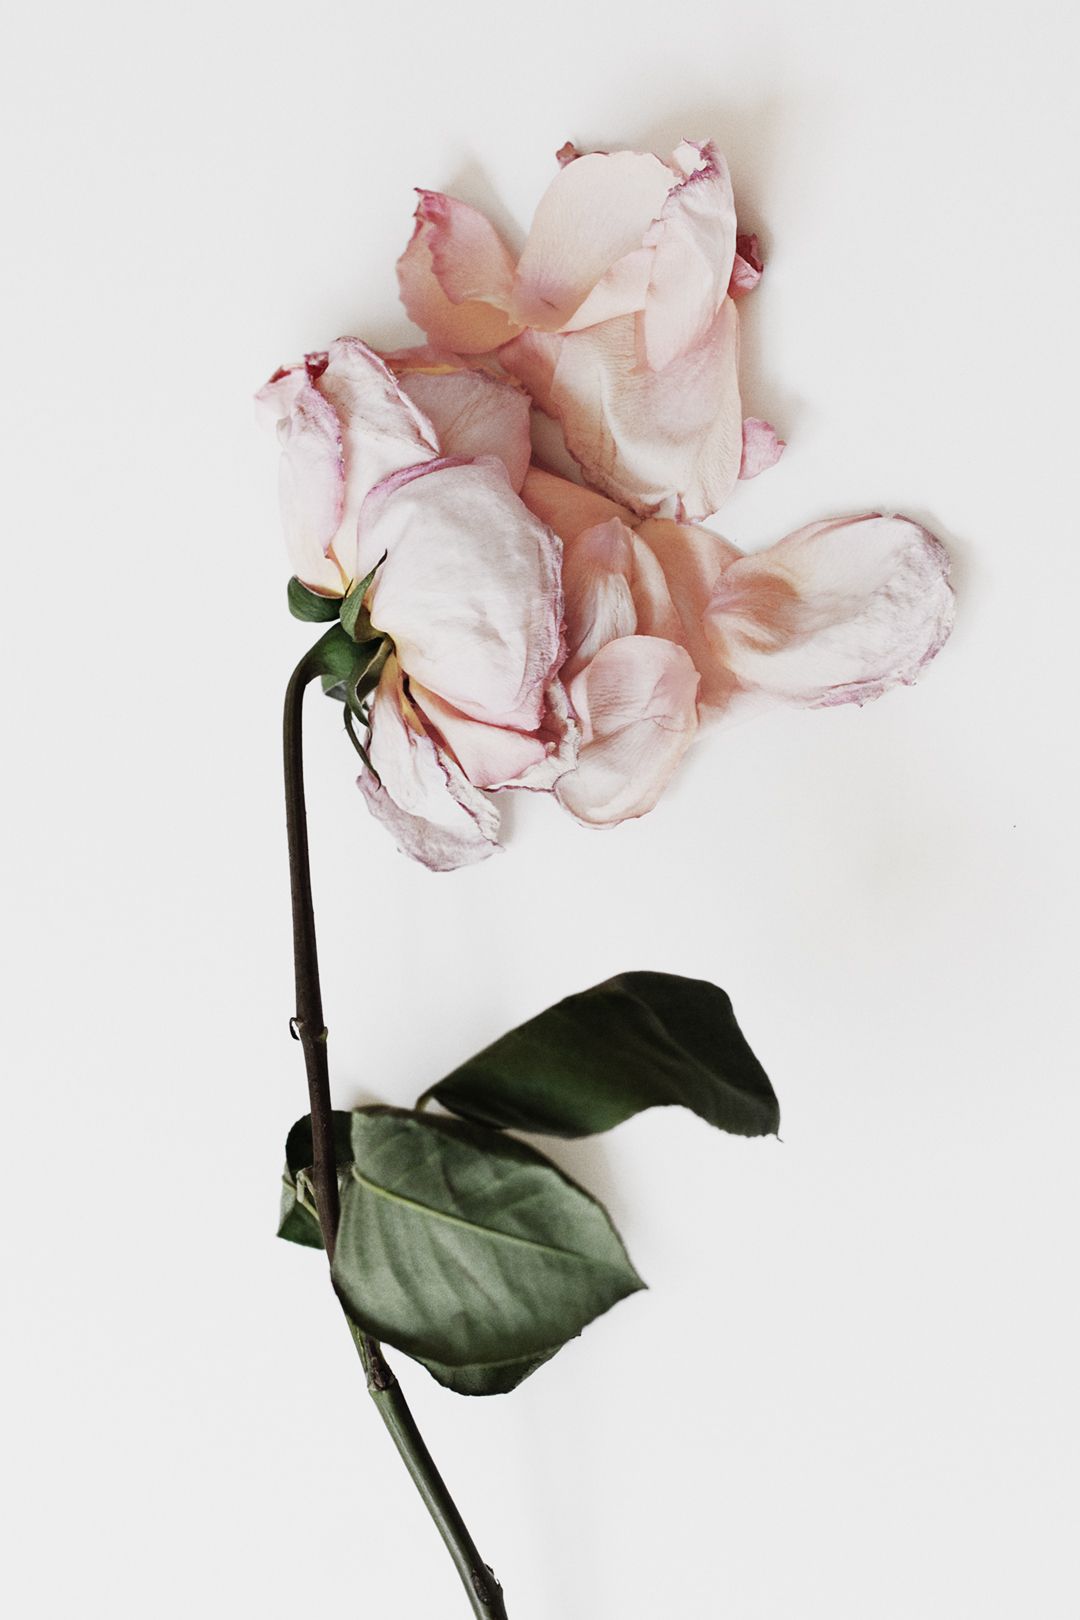 Dead rose i by tristan b. Flower aesthetic, Plant photography, Photohop editing